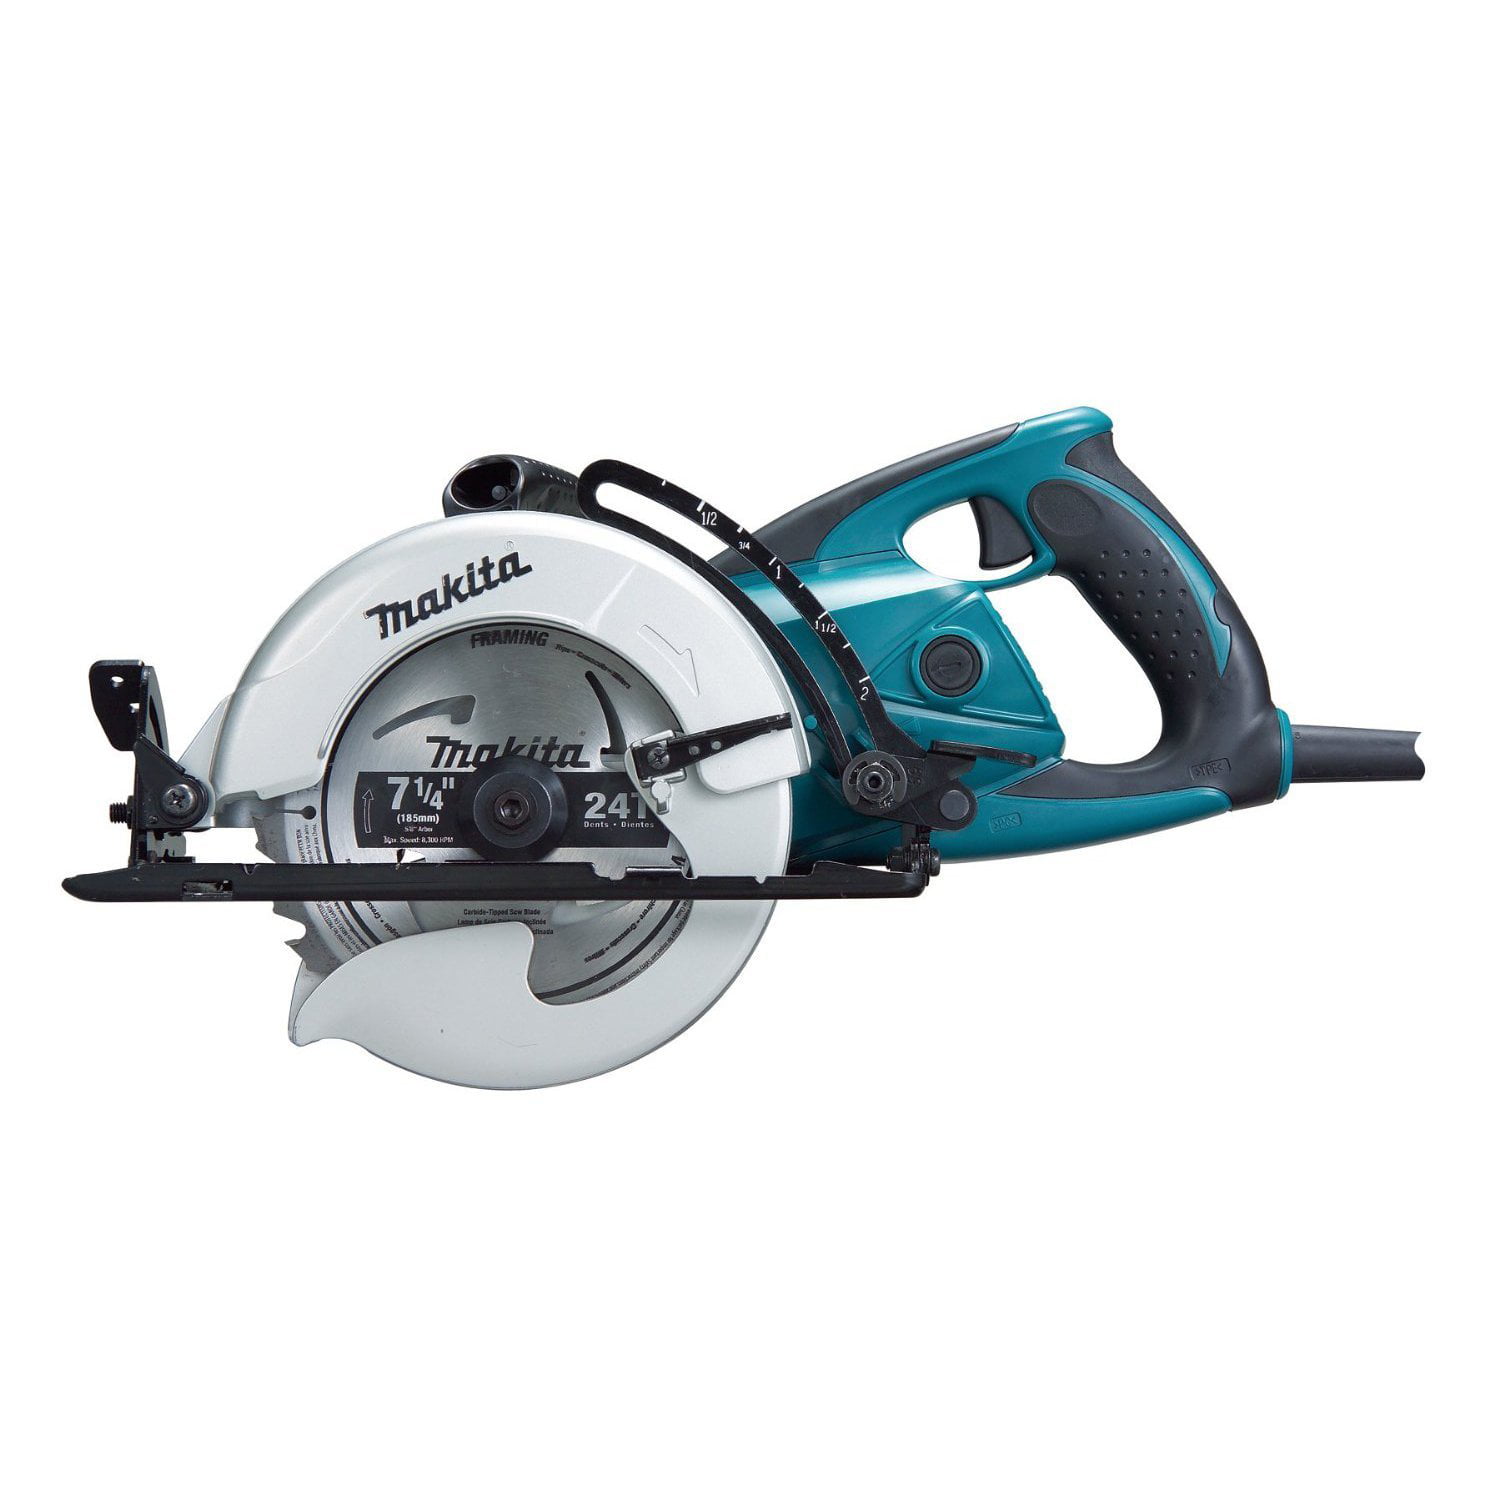 MAKITA Magnesium Hypoid Circular Saw 15 Amp 7-1/4 in.Lightweight Built In Fan 